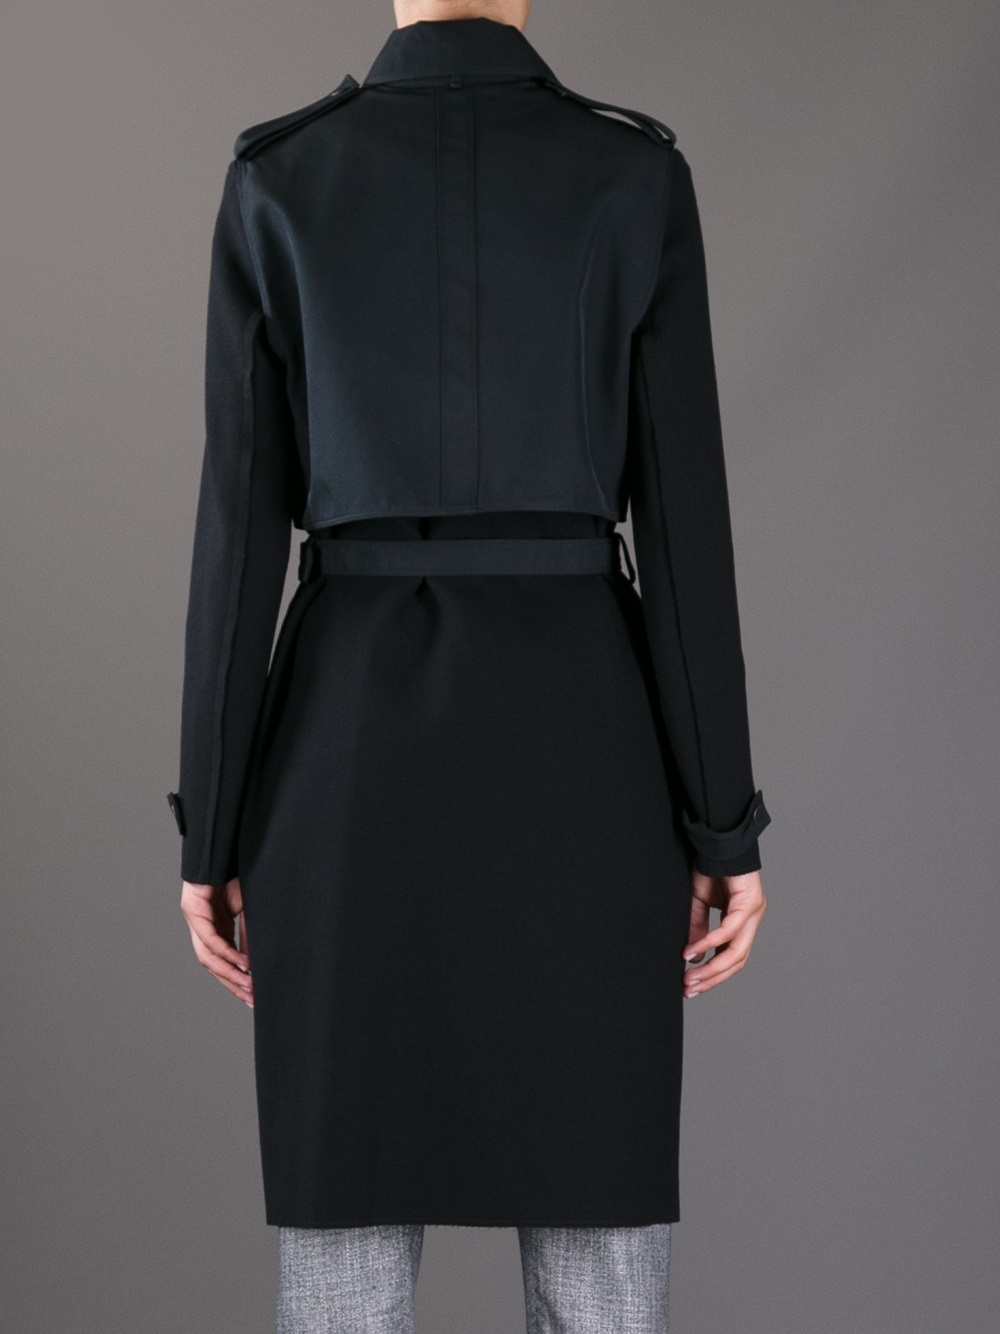 Lanvin Layered Belted Coat in Black | Lyst